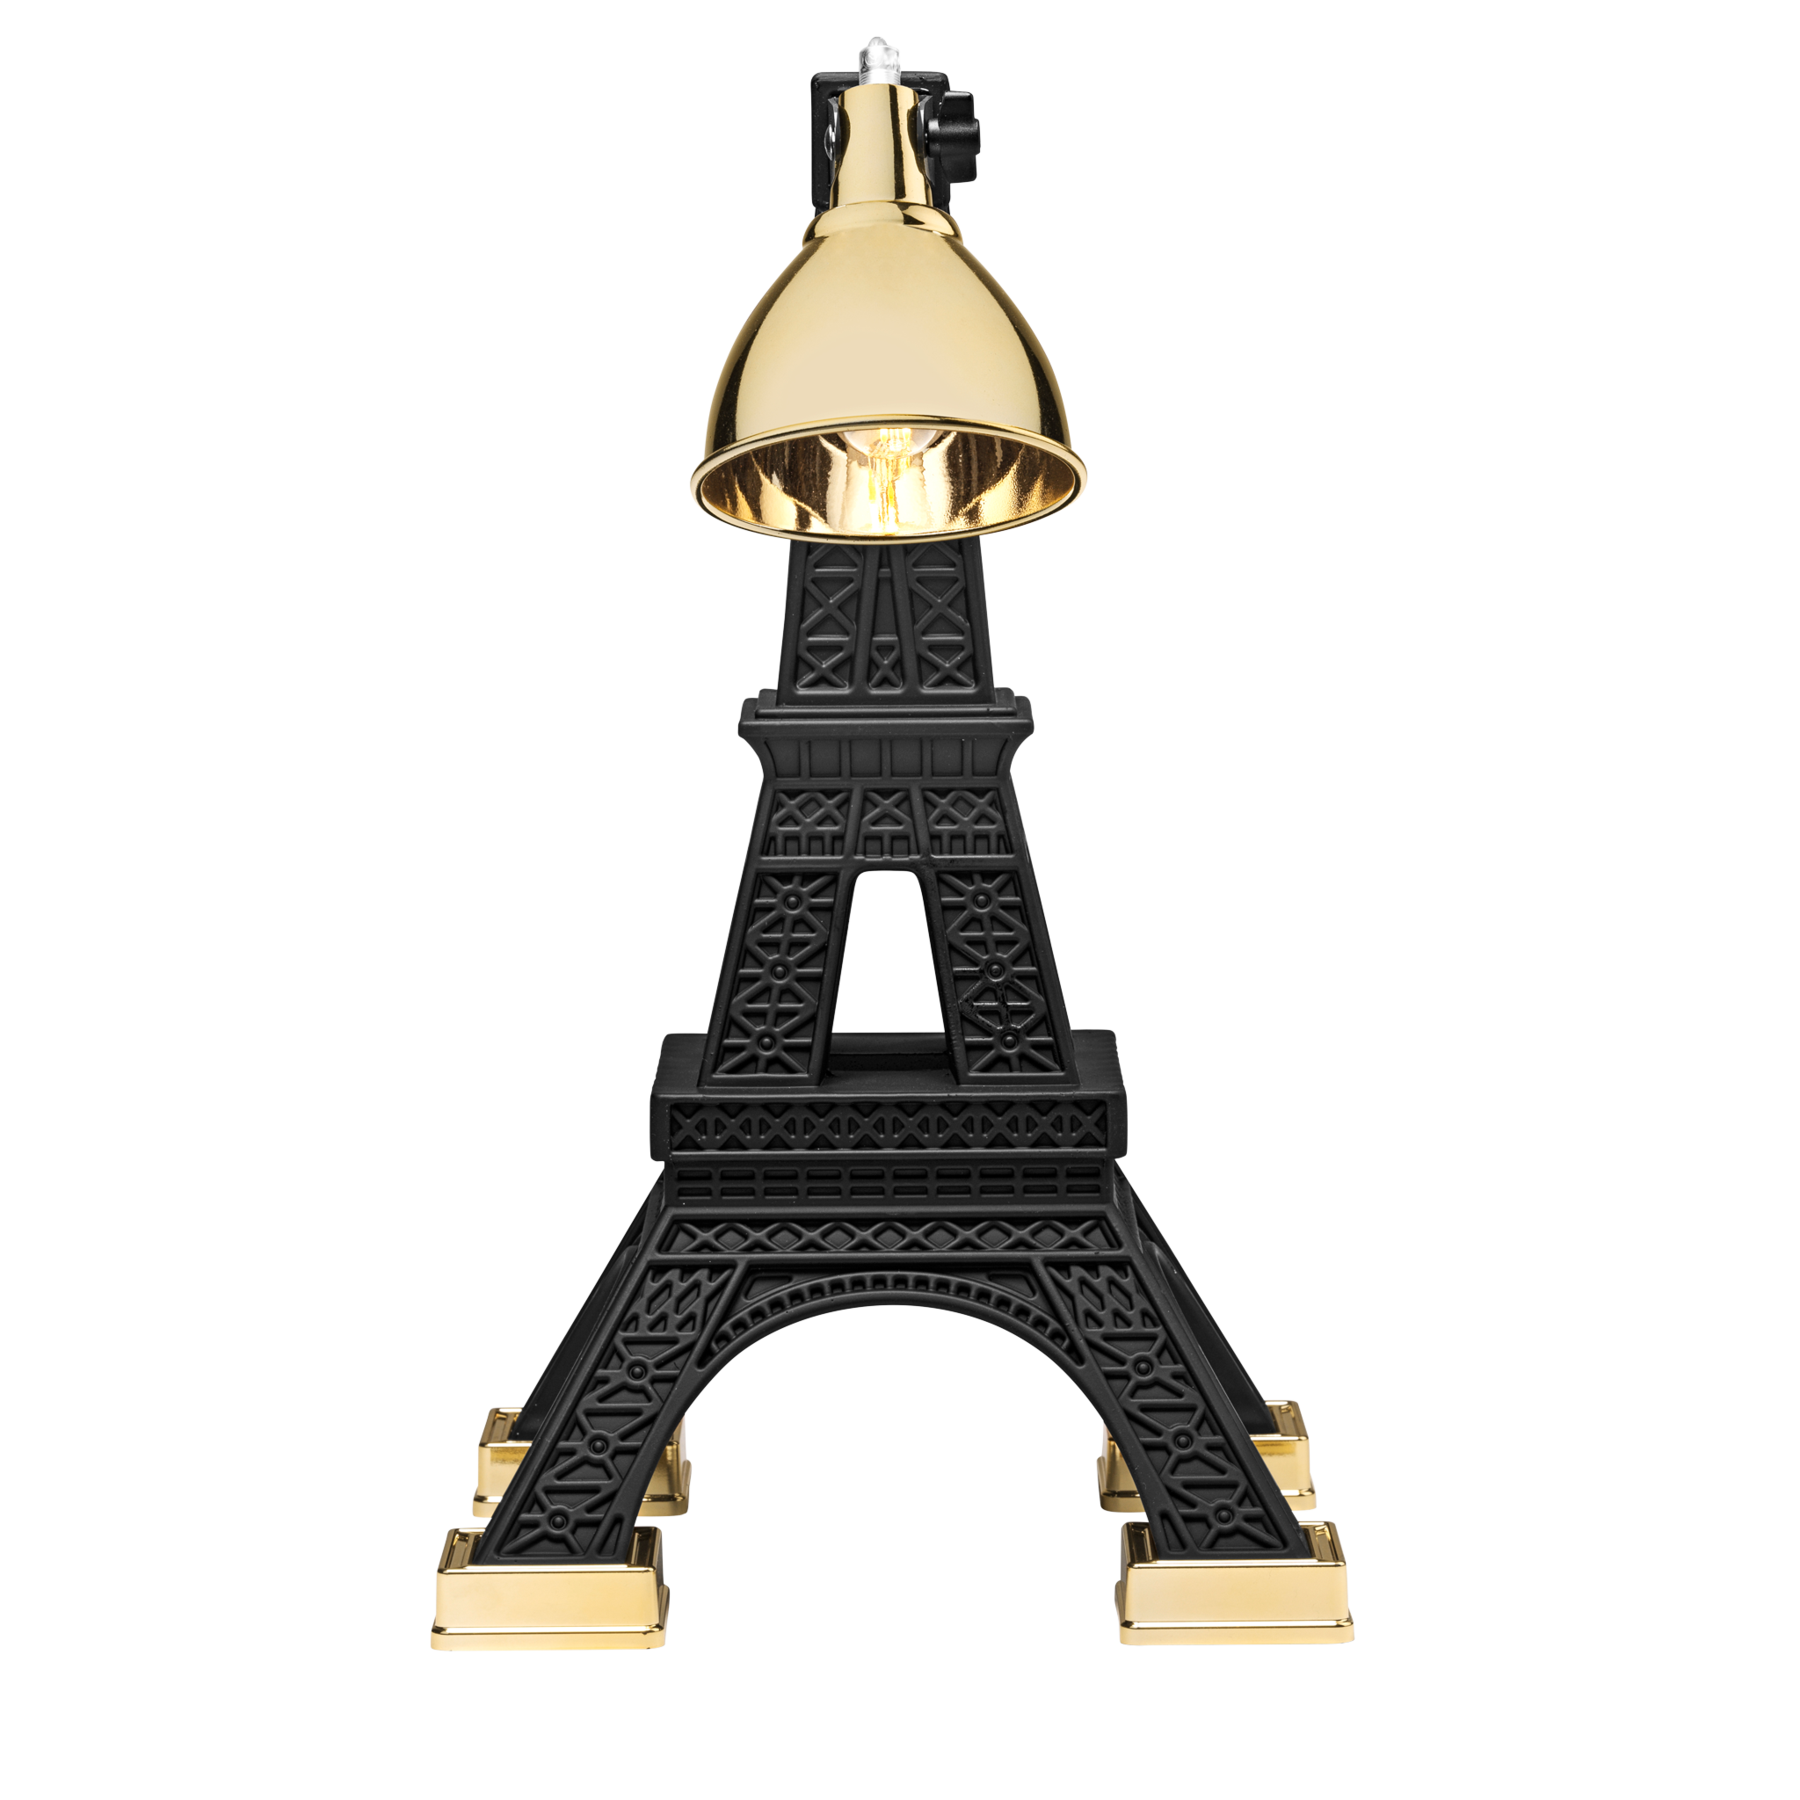 Paris lamps from Qeebooo, designed by the Job studio, presents over 2 meters of the Eiffel Tower. The concept of Job Smeets was inspired by the years when he lived in Paris as a young "artist", and the Eiffel Tower was his neighbor who gave him comfort.